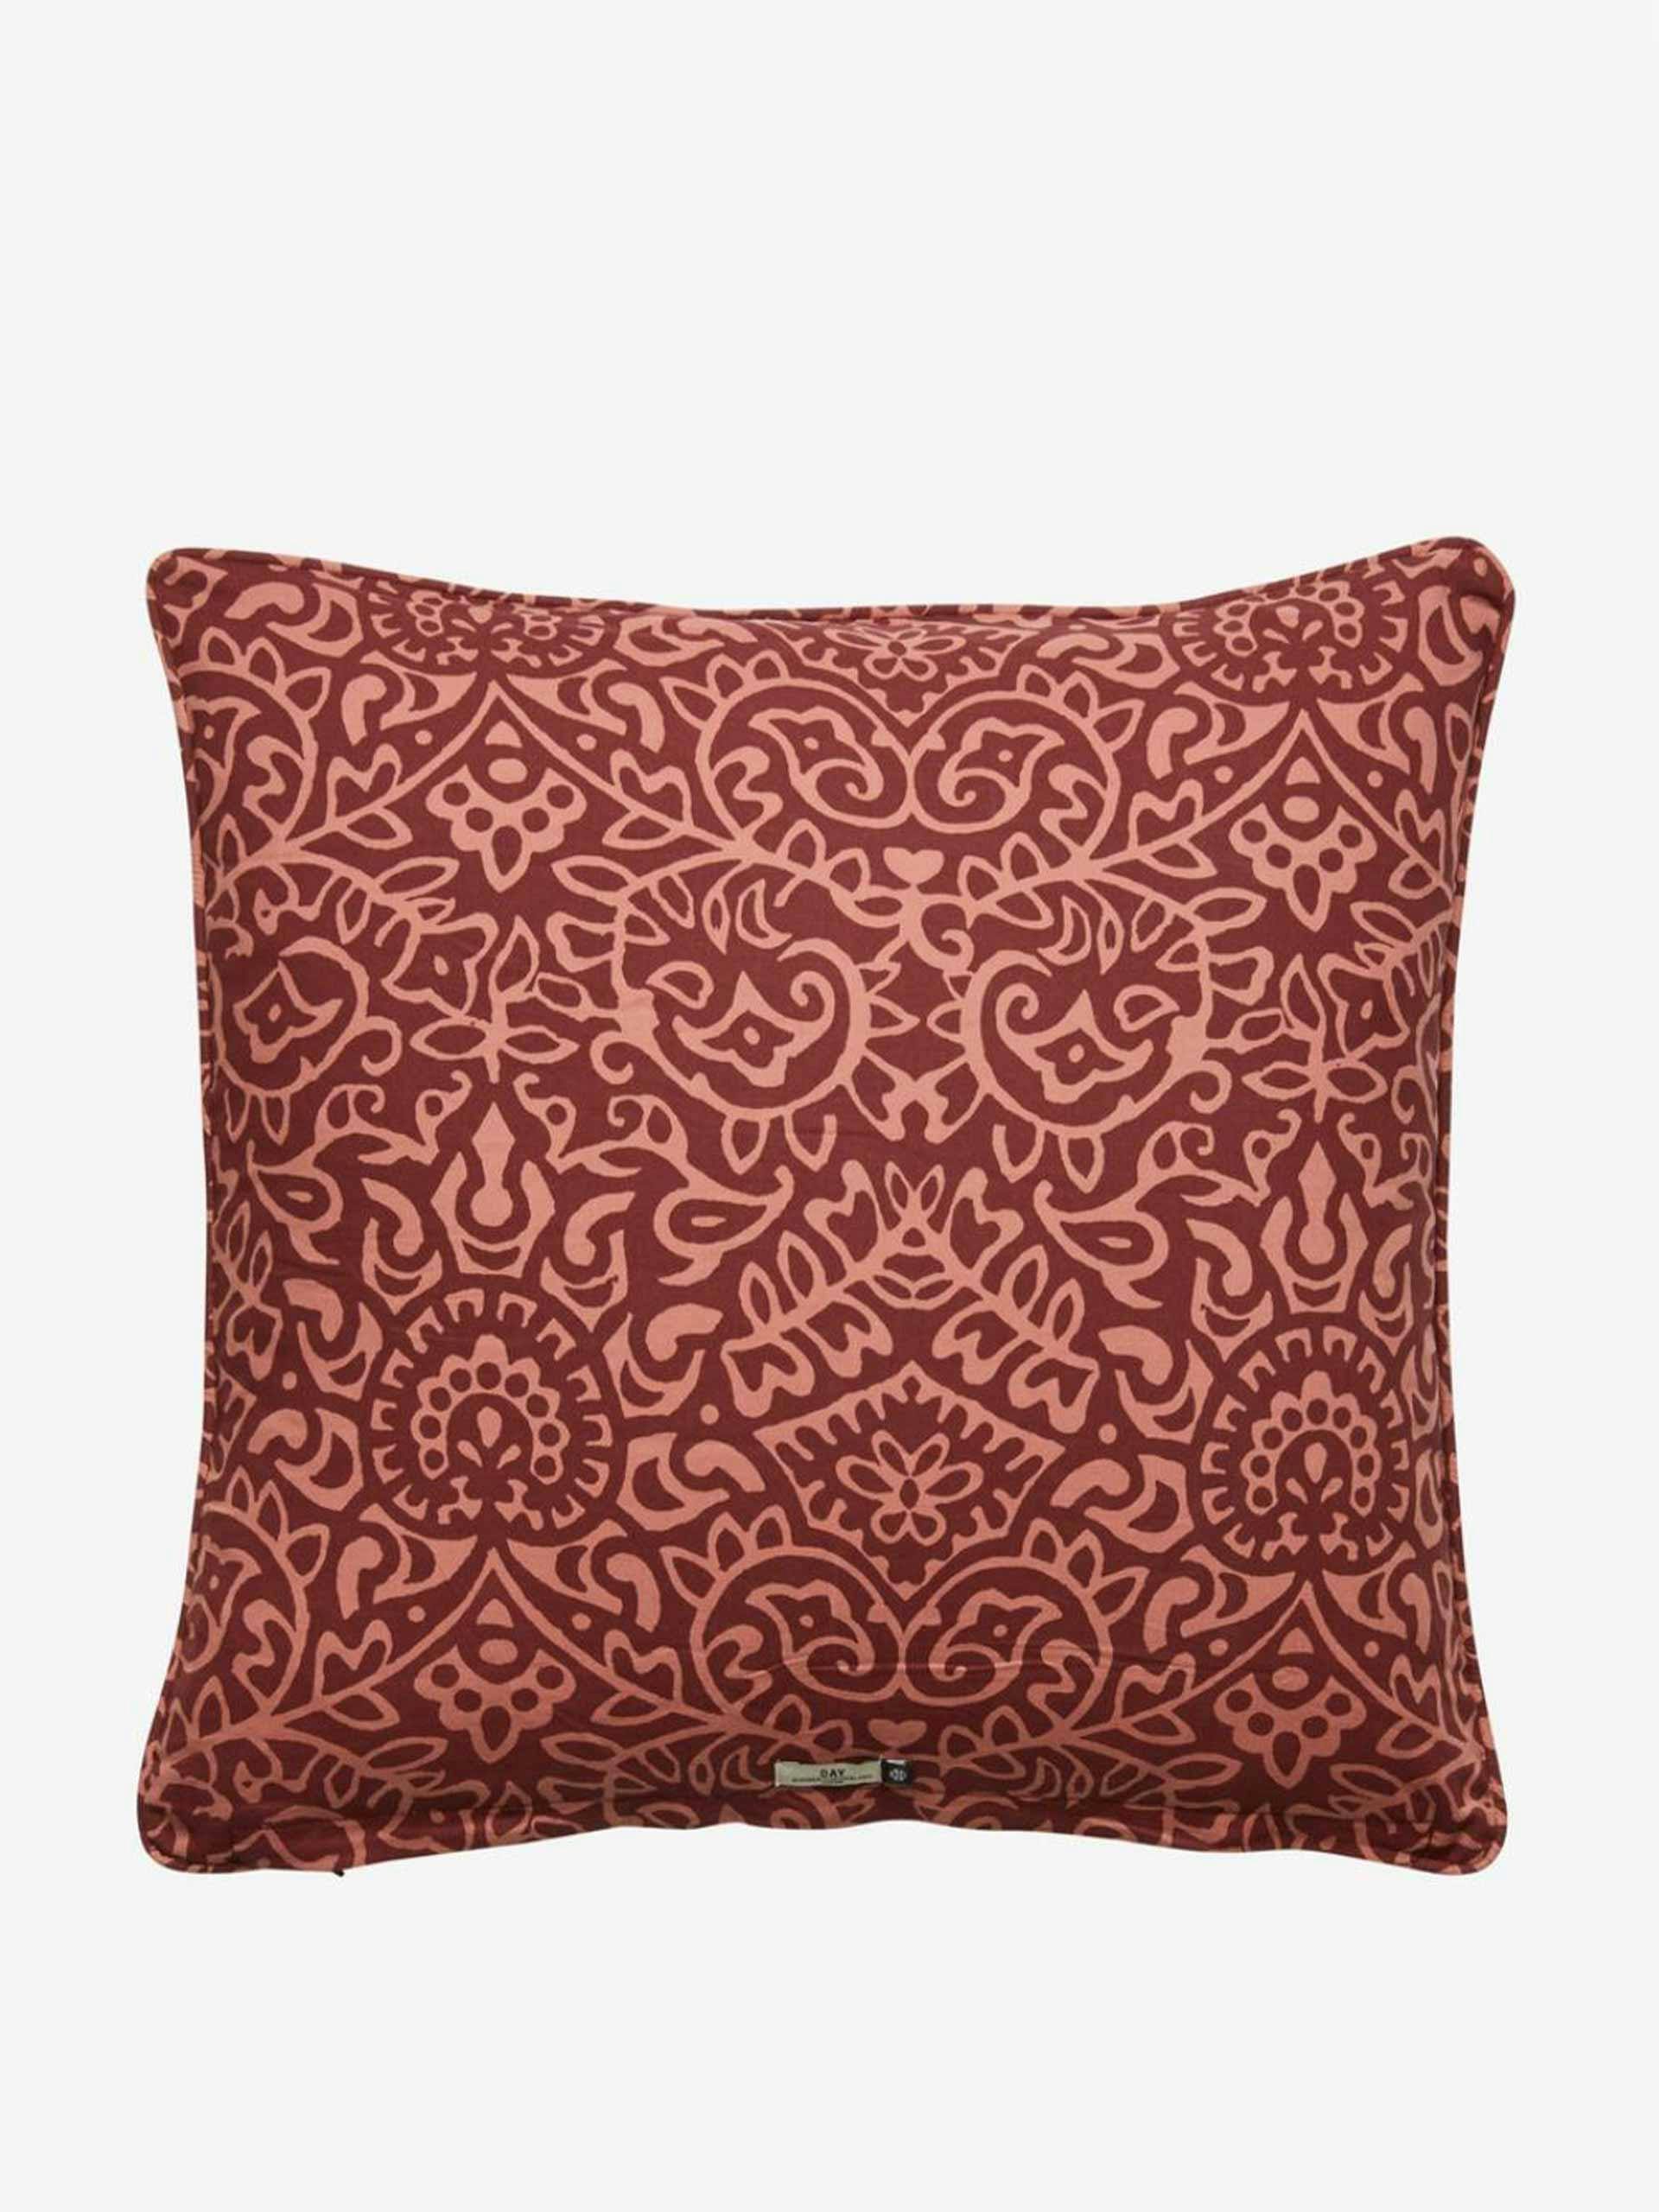 Hippie patterned cushion